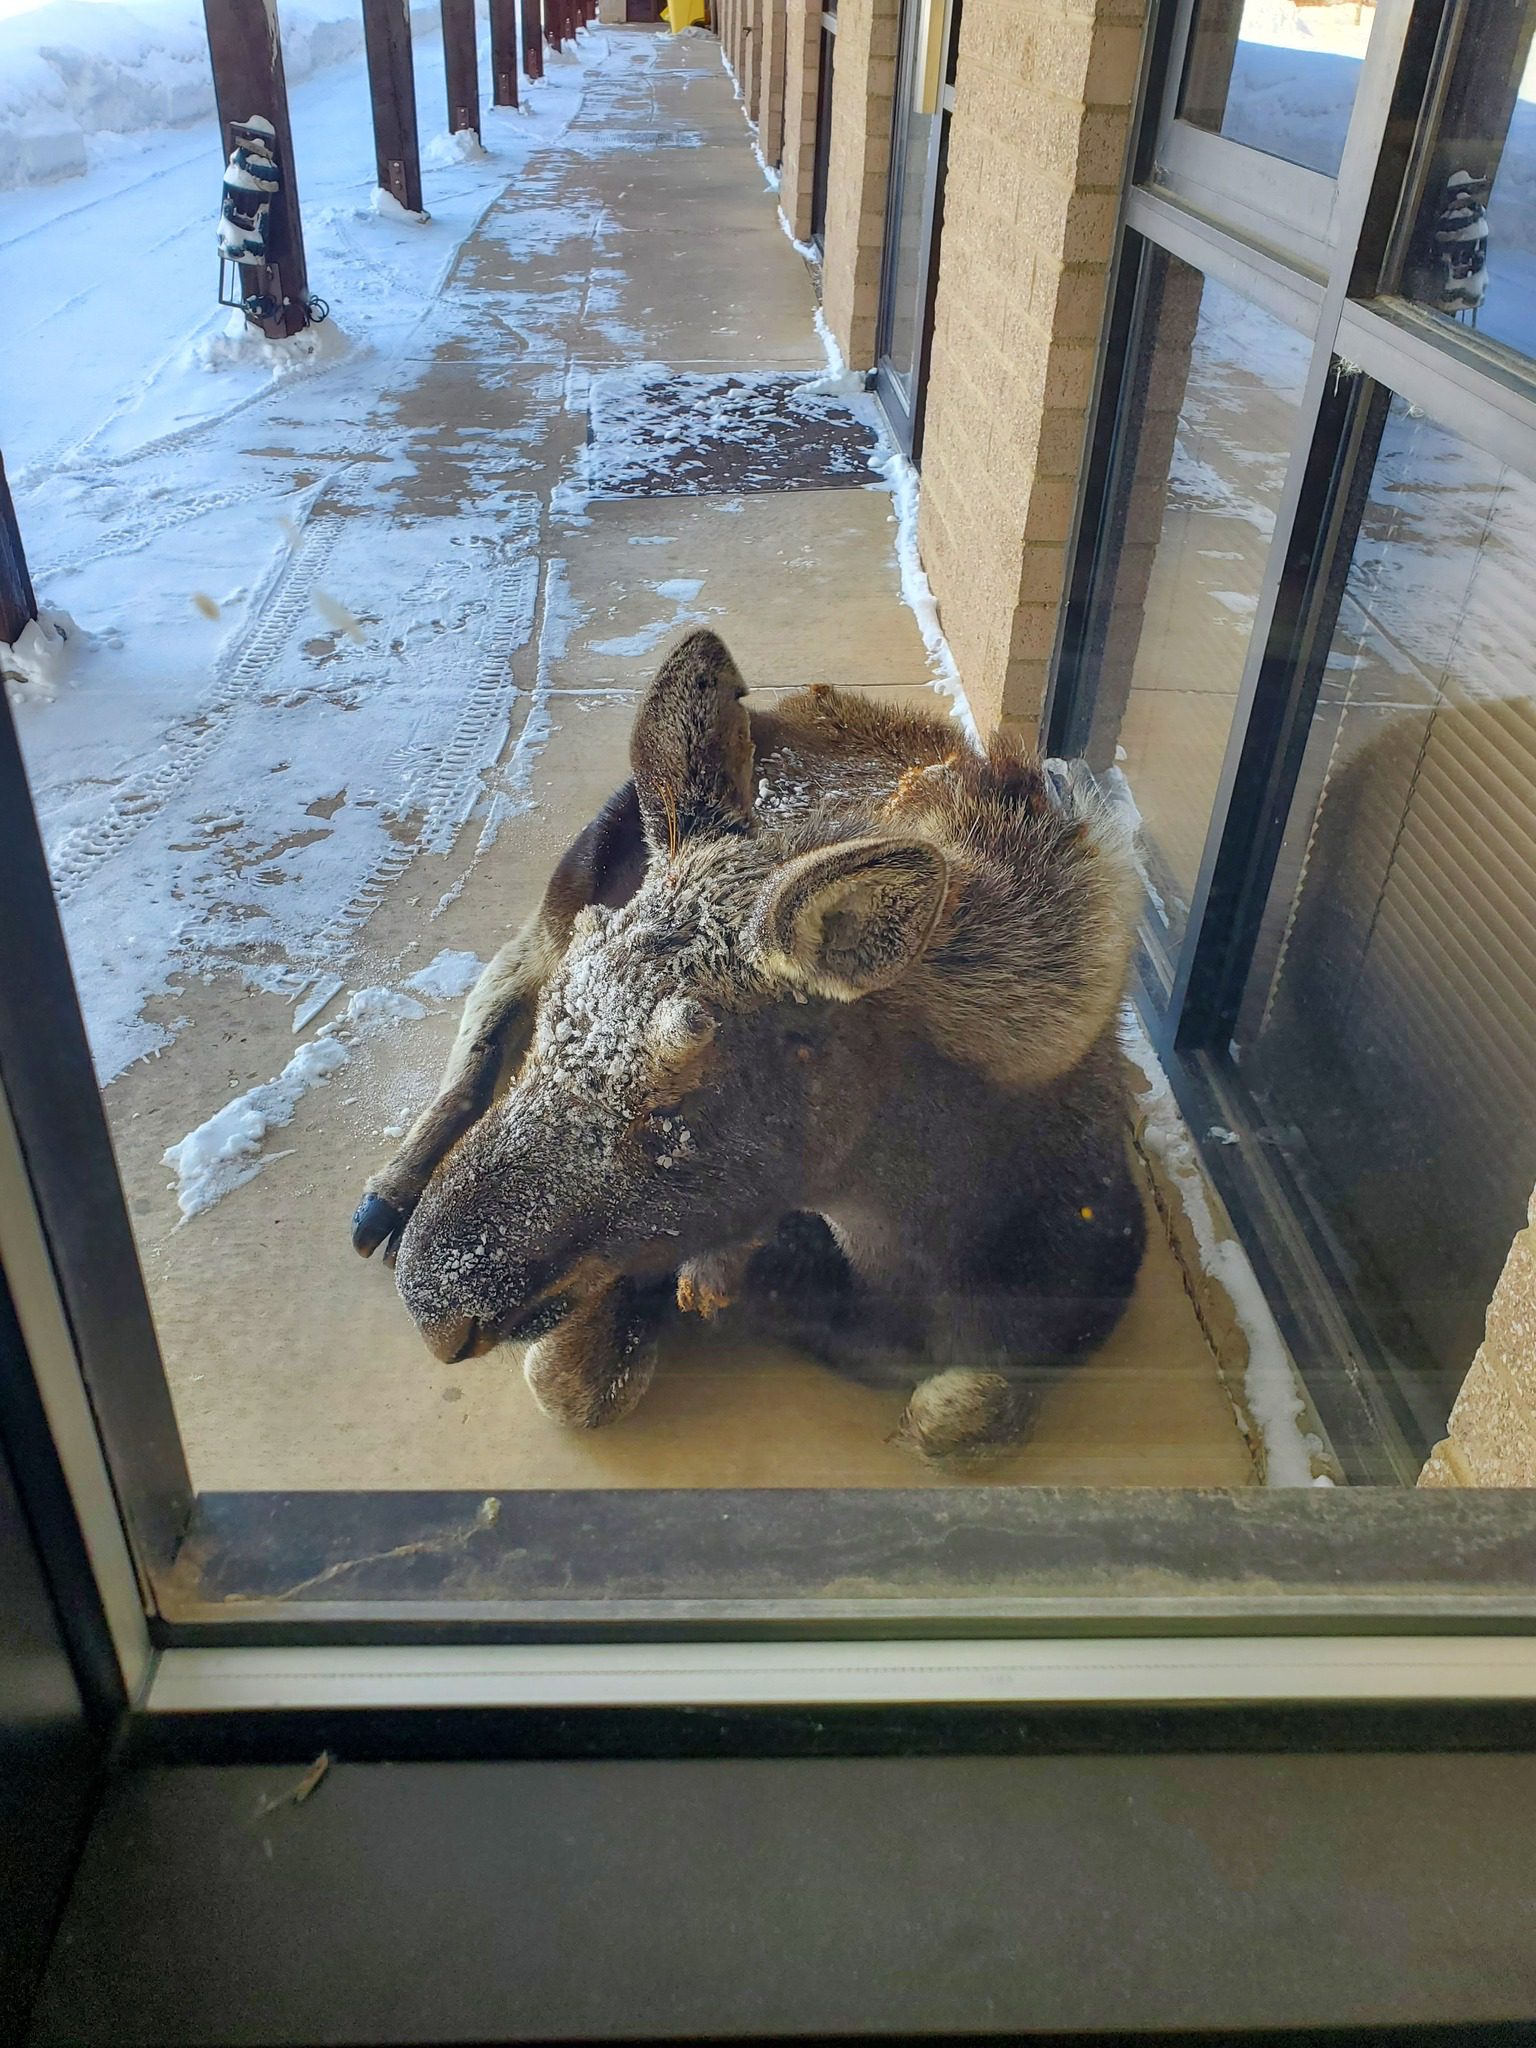 A young bull moose has taken up residence at the Evanston Ranger District office. Photo: U.S. Forest Service Uinta-Wasatch-Cache National Forest